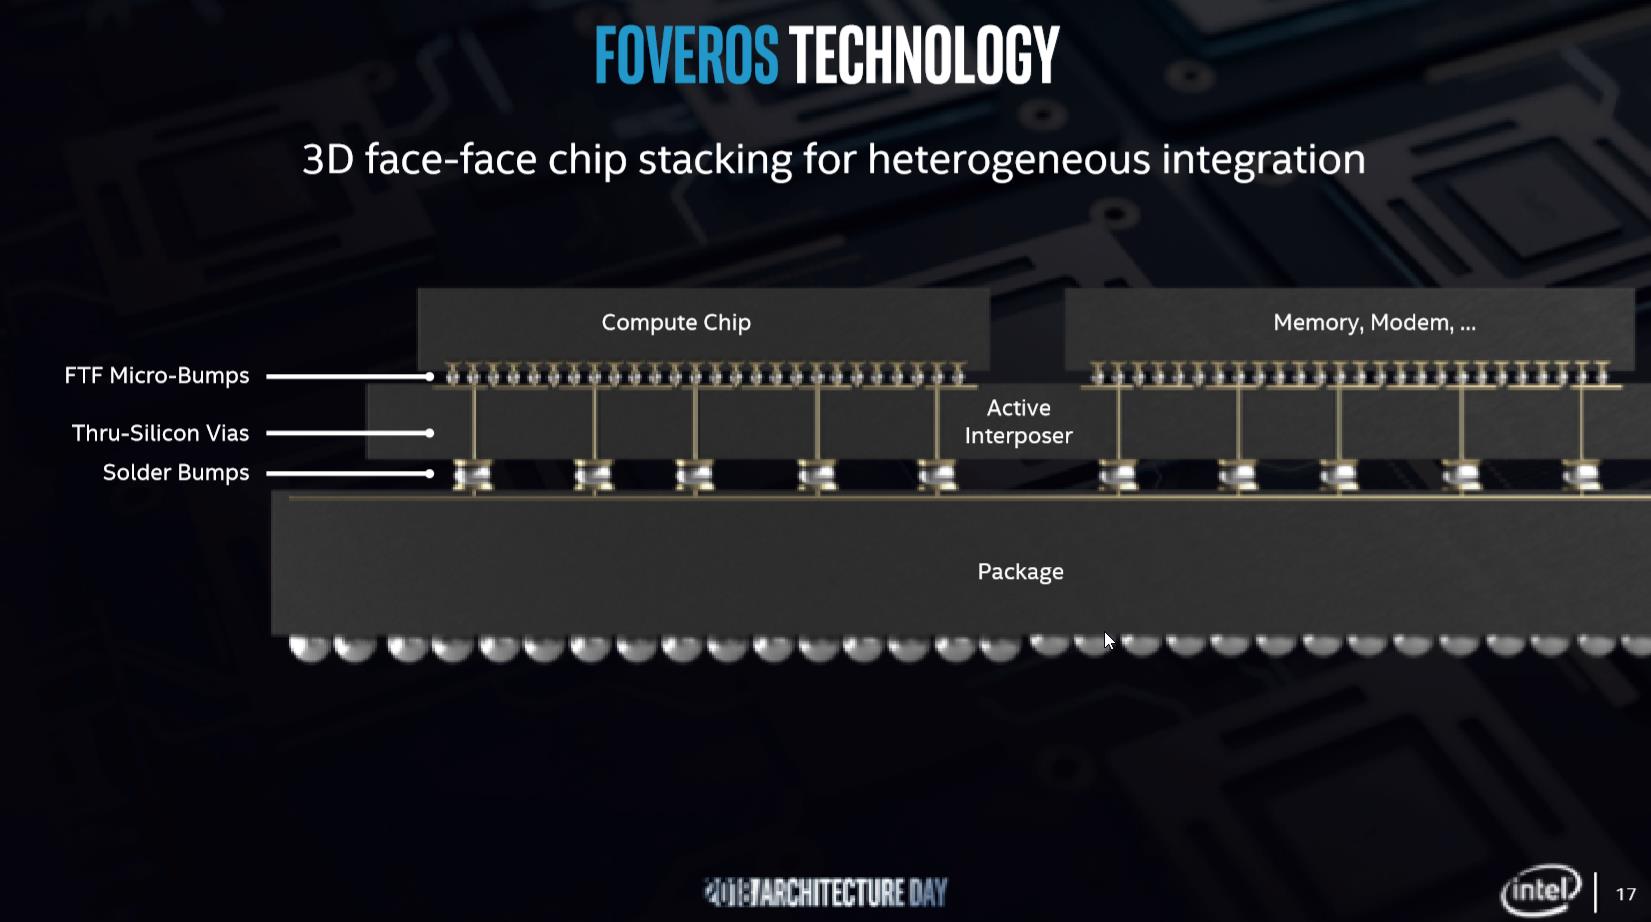 Foveros' microbumps enable face-to-face communication between dies.